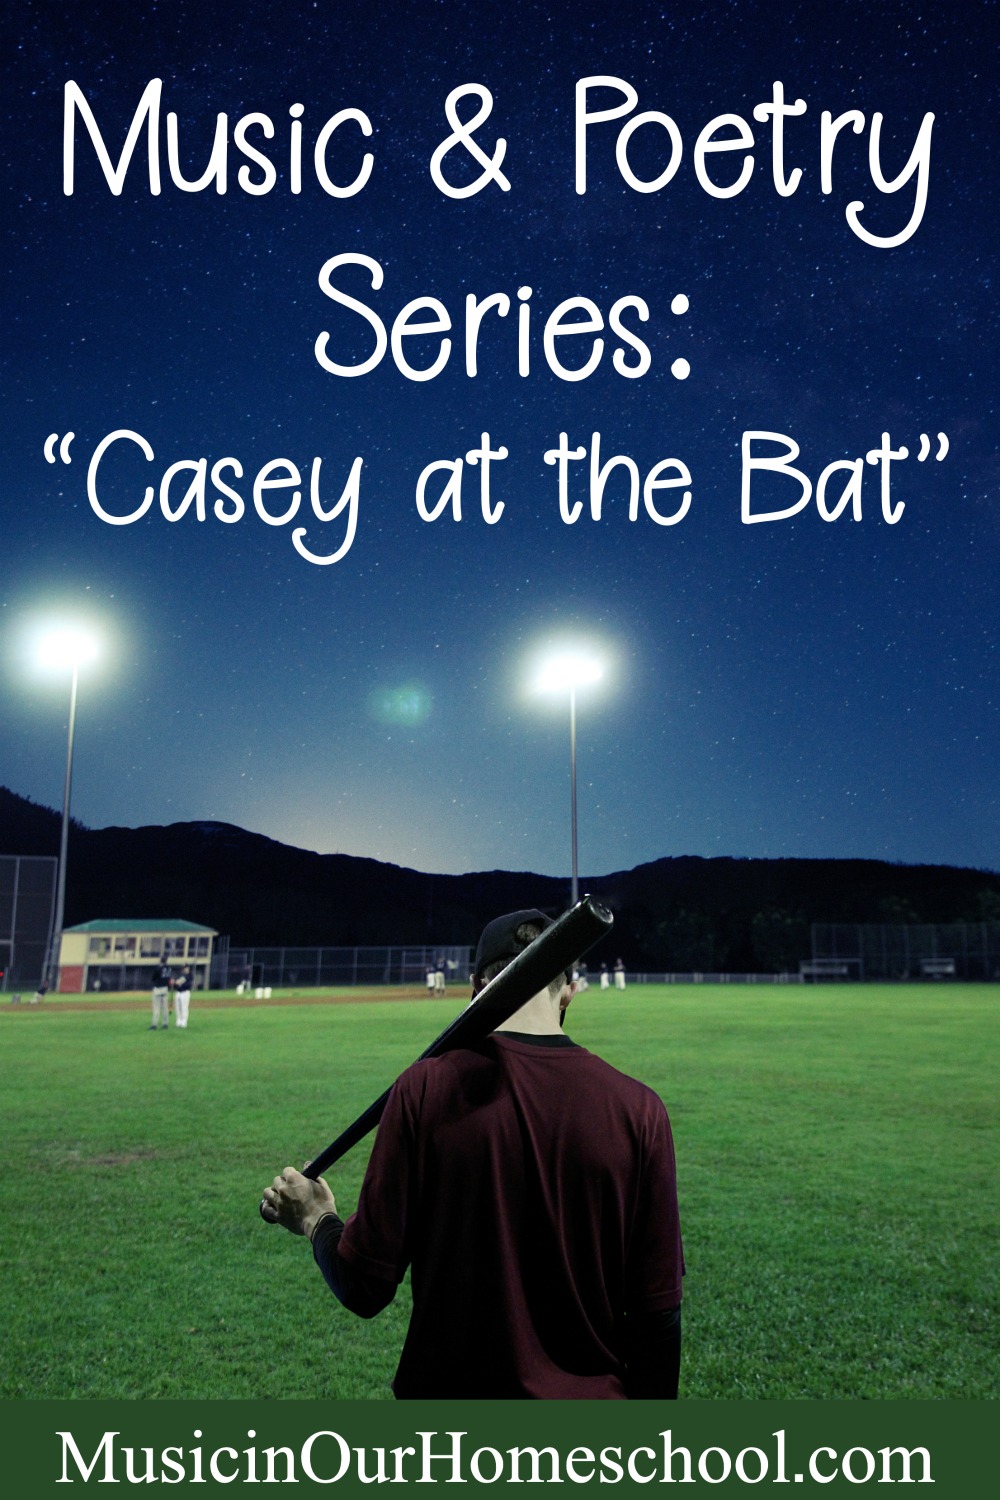 Music and Poetry Series with poem Casey at the Bat. #music #poetry #musicinourhomeschool #homeschoolmusic